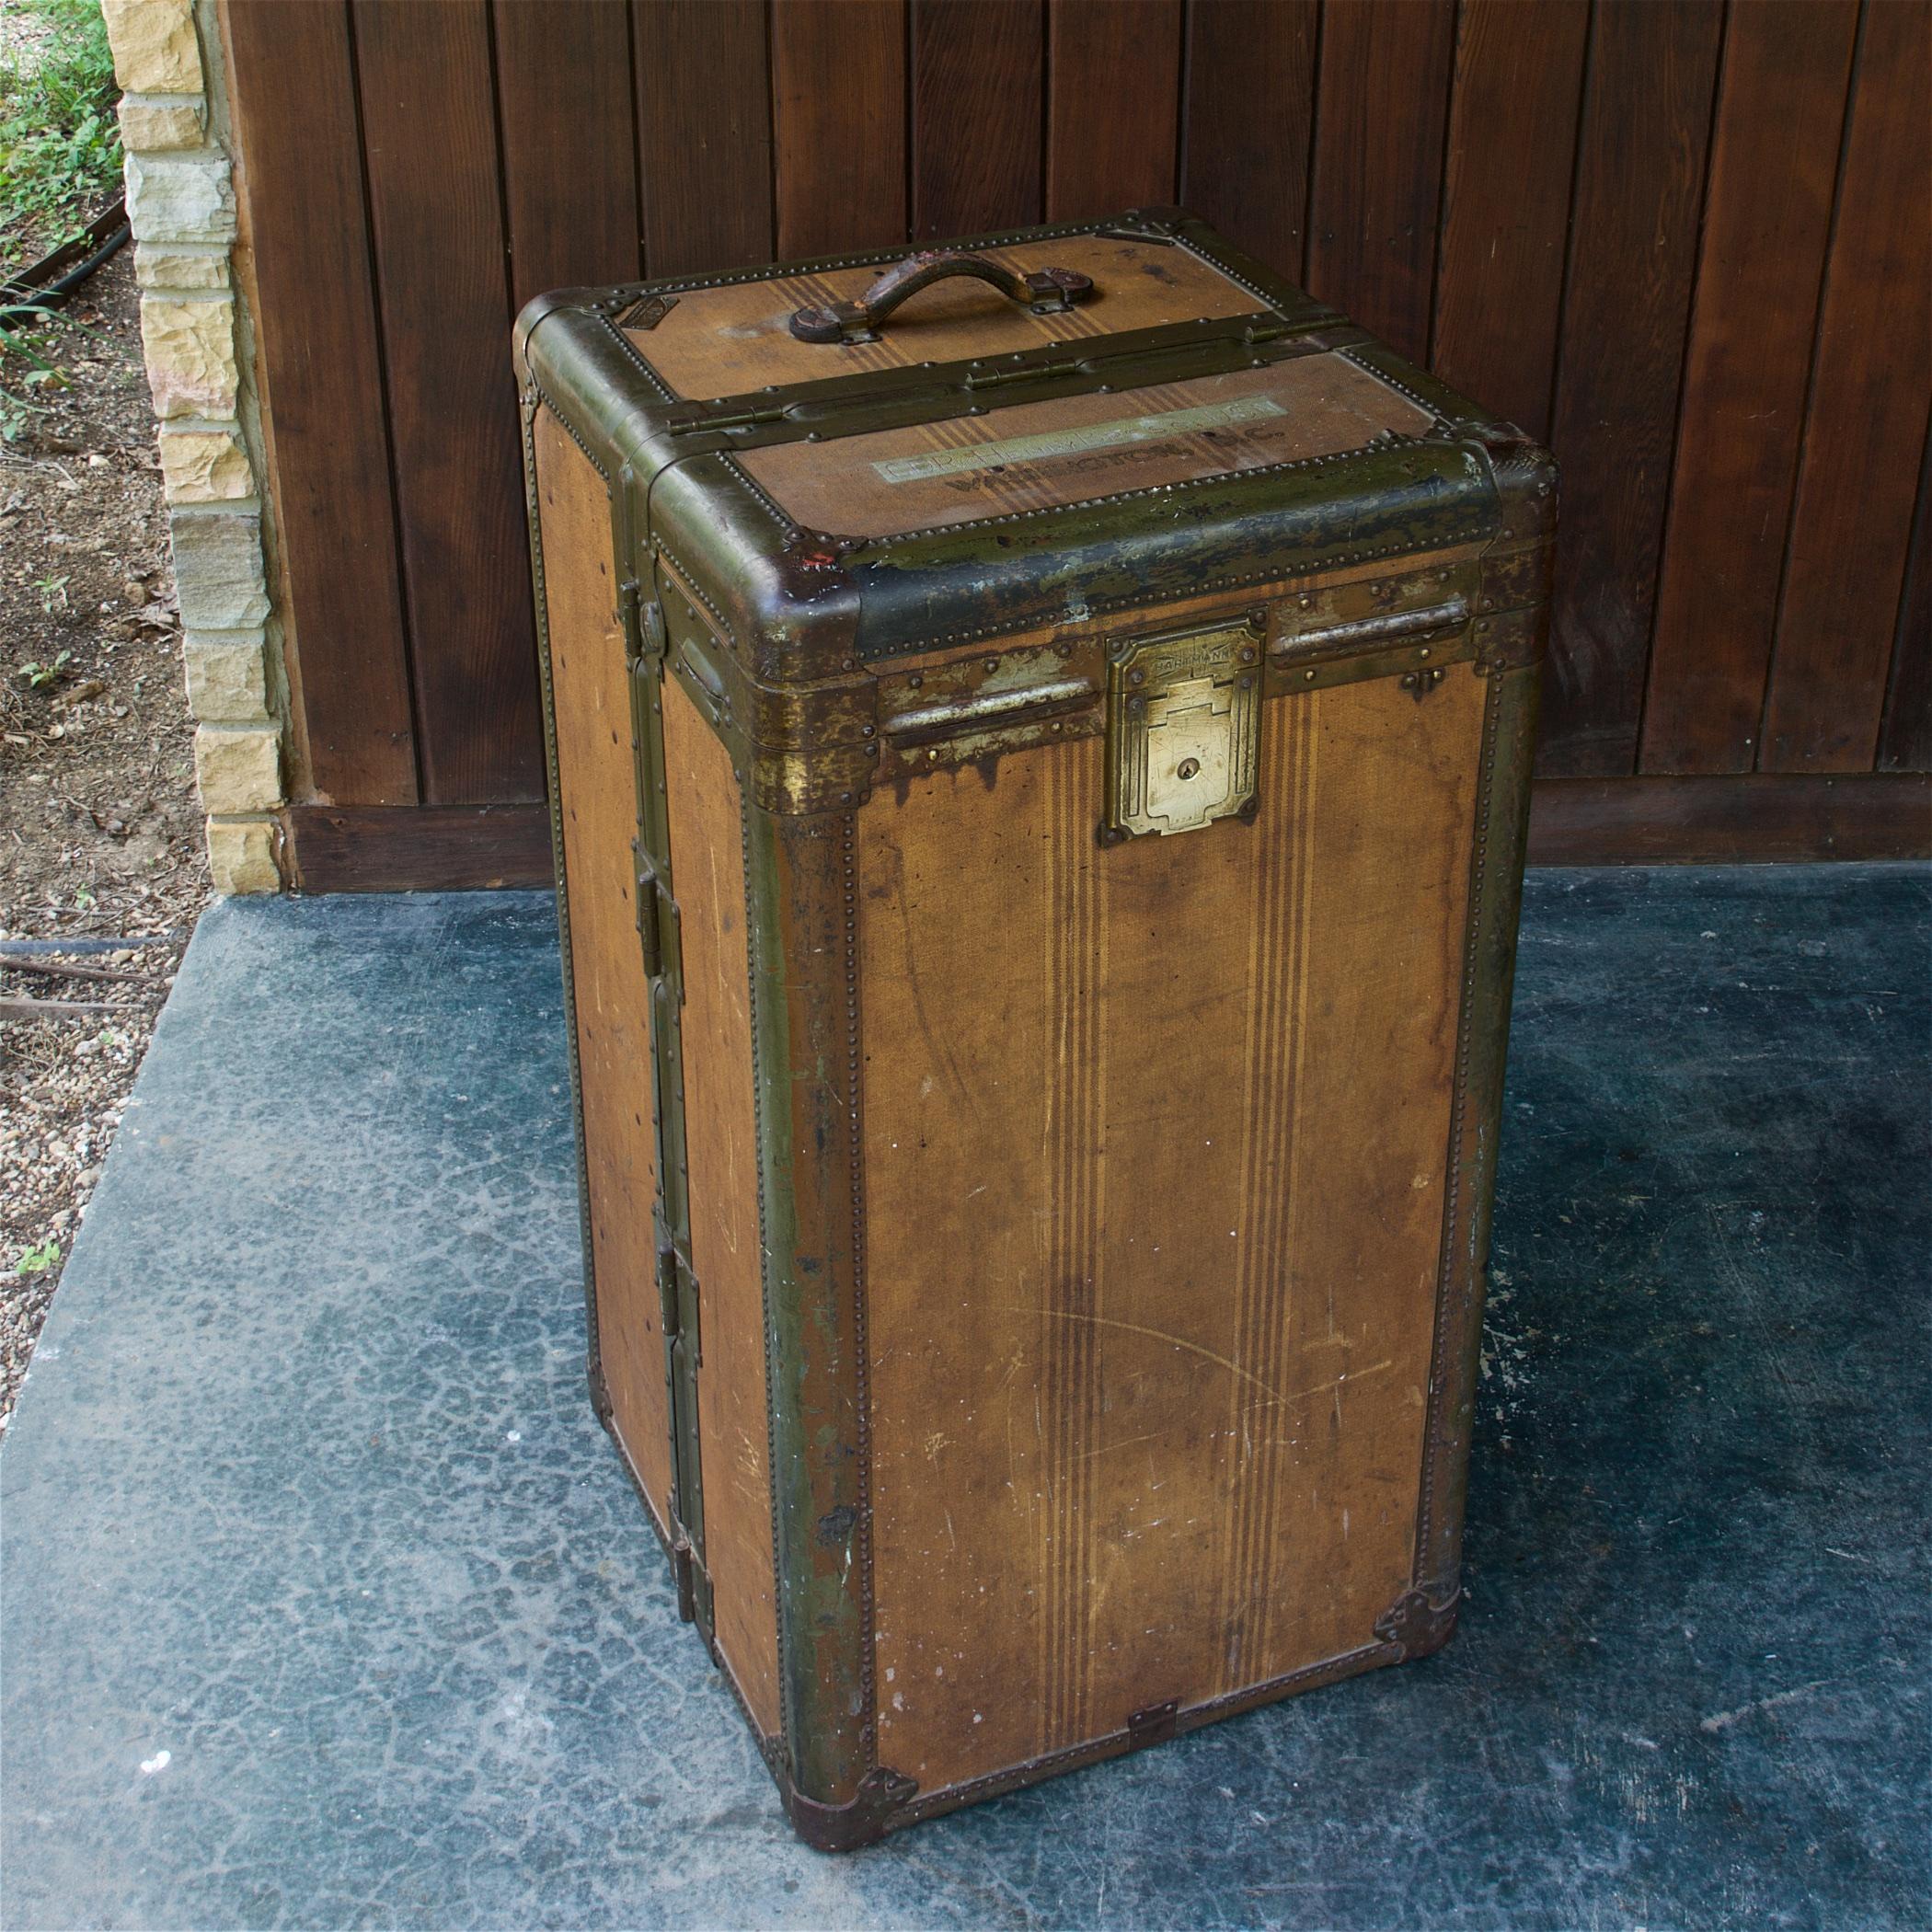 Top of the line, early 20th century cartage! A wonderfully patinated Washington DC Estate wardrobe trunk. Massive stylized brass Yale Locking Mechanism, with One Yale key included, this also works the internal drawer lock. Fully functional; Open